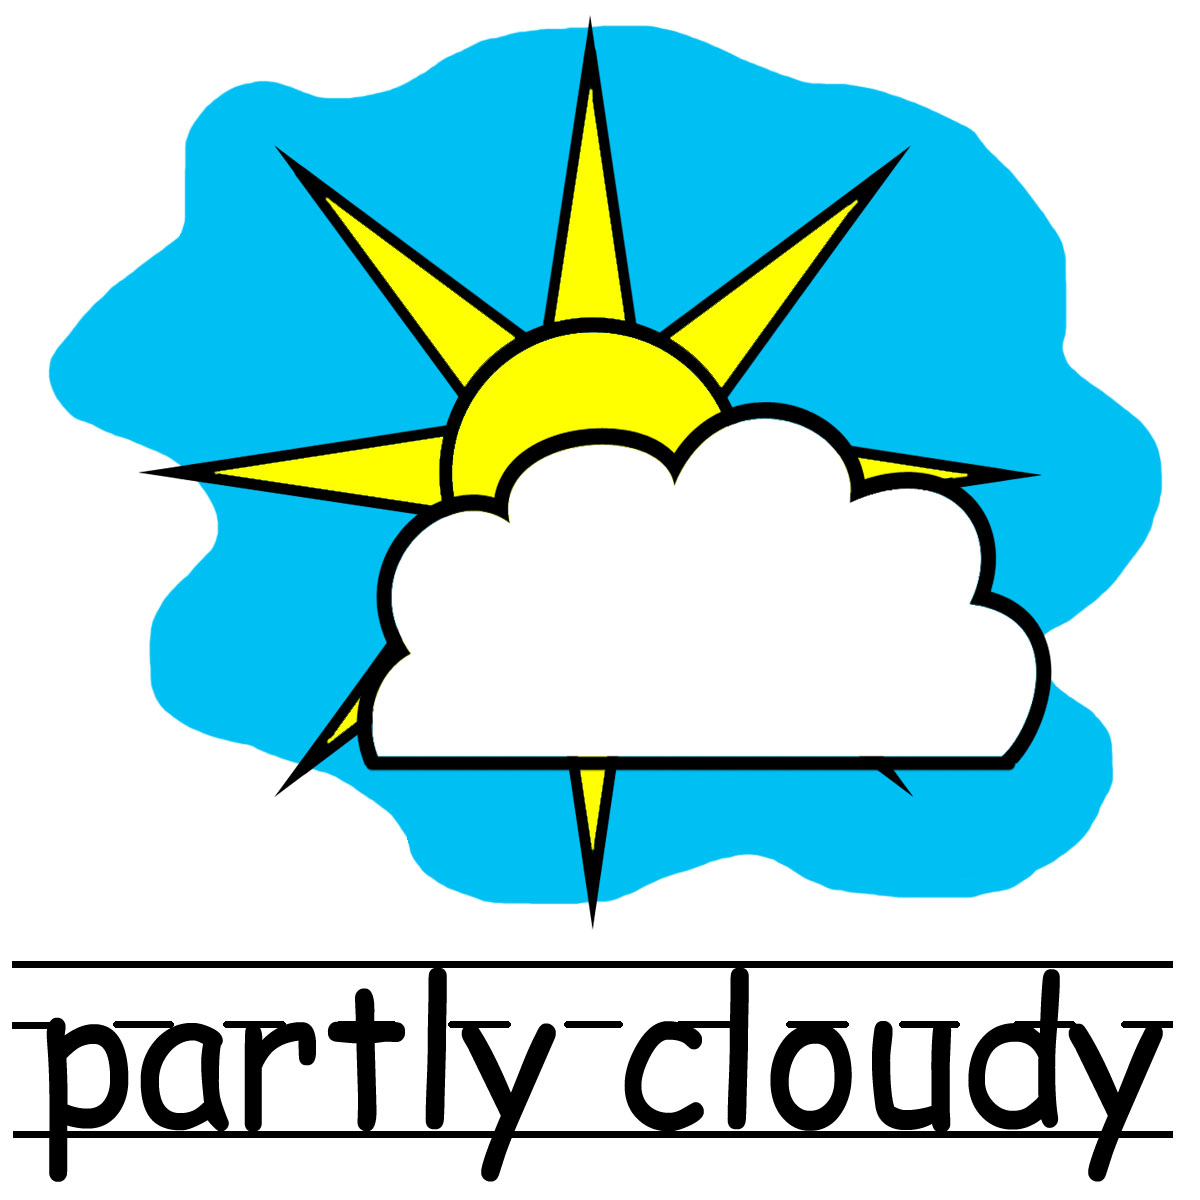 Perfect weather clipart